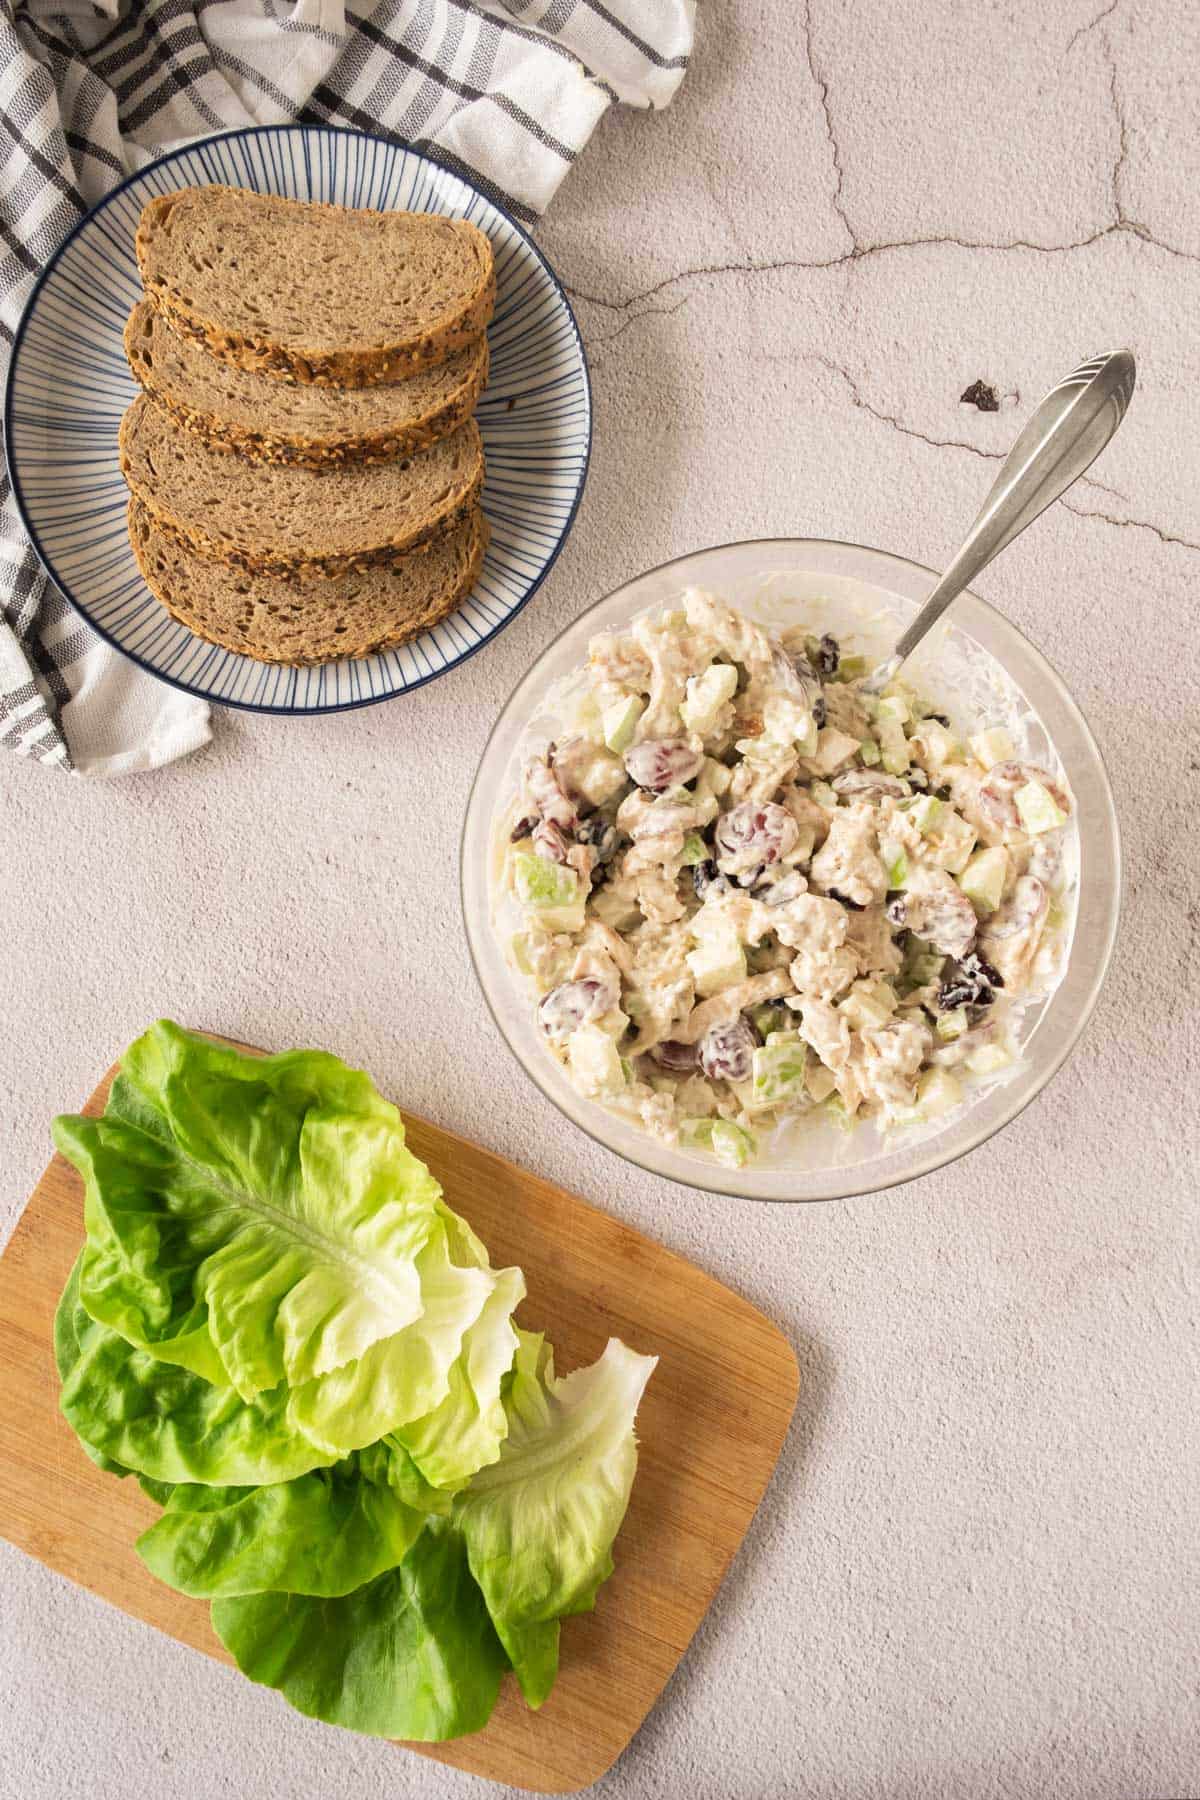 A bowl of chicken salad and bread on a table.